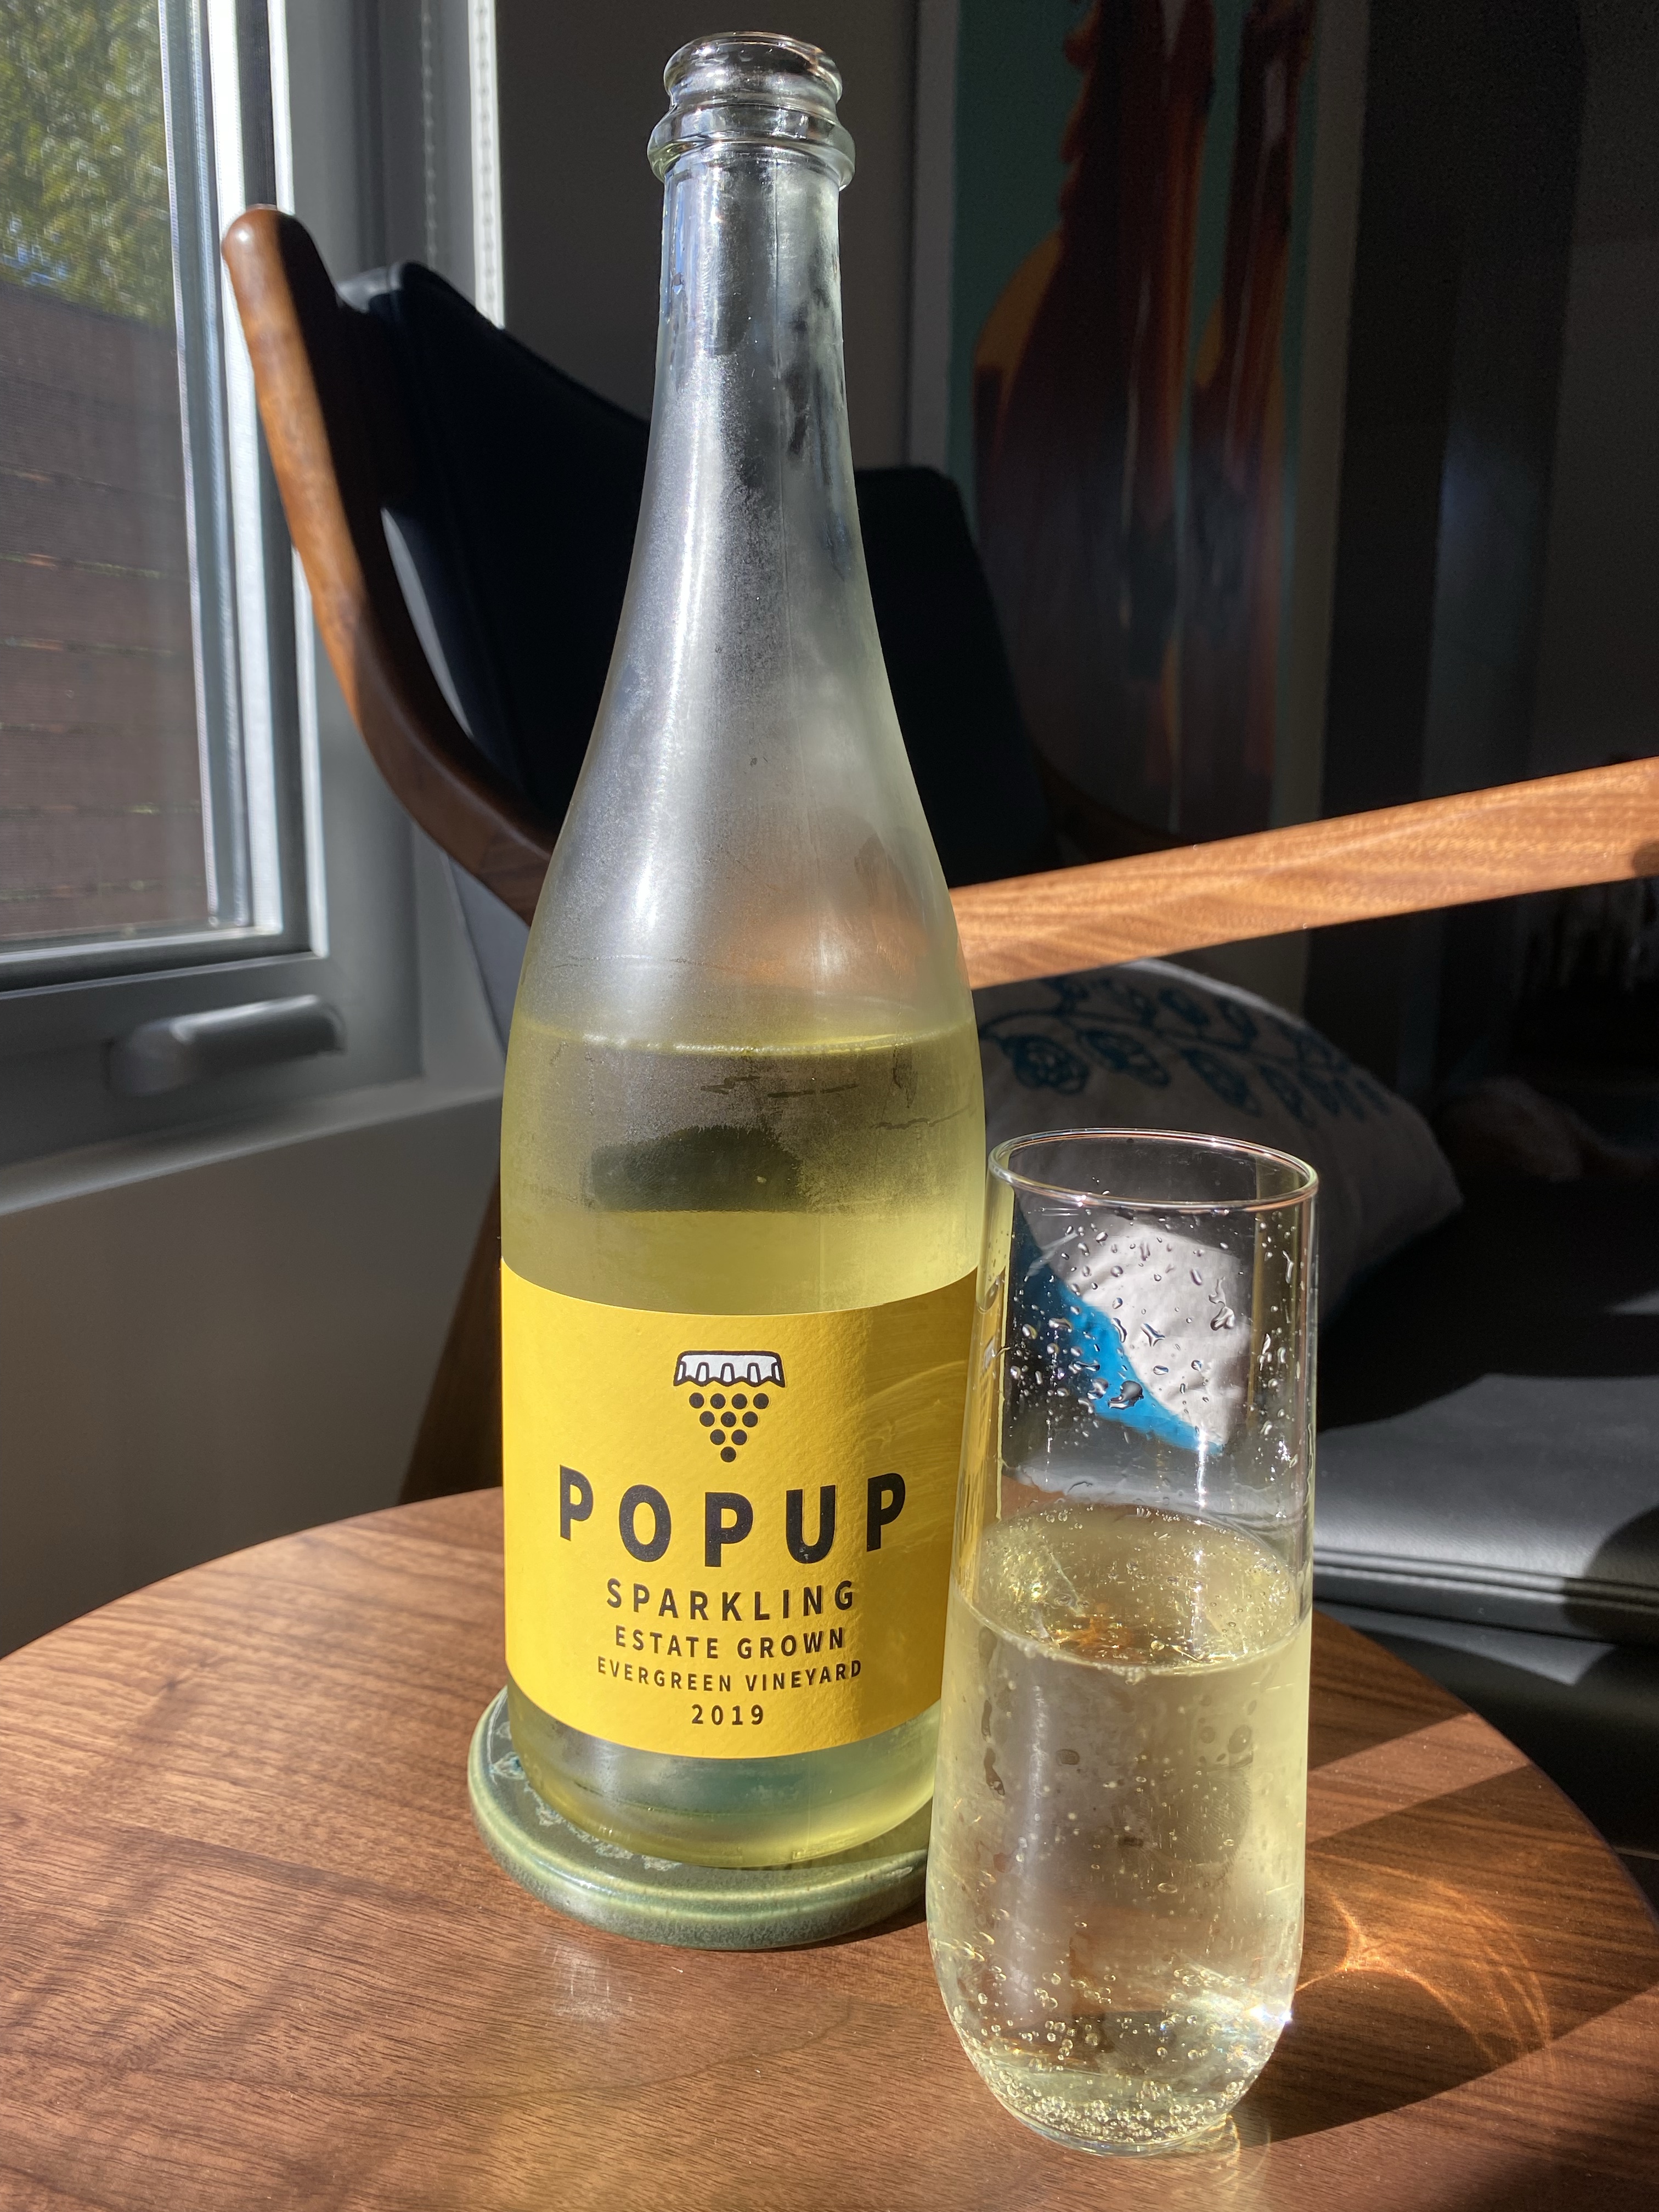 Glass and bottle of the 2019 Pop Up Sparkling, 100% Chardonnay, Evergreen Vineyard, Columbia Valley, Washington